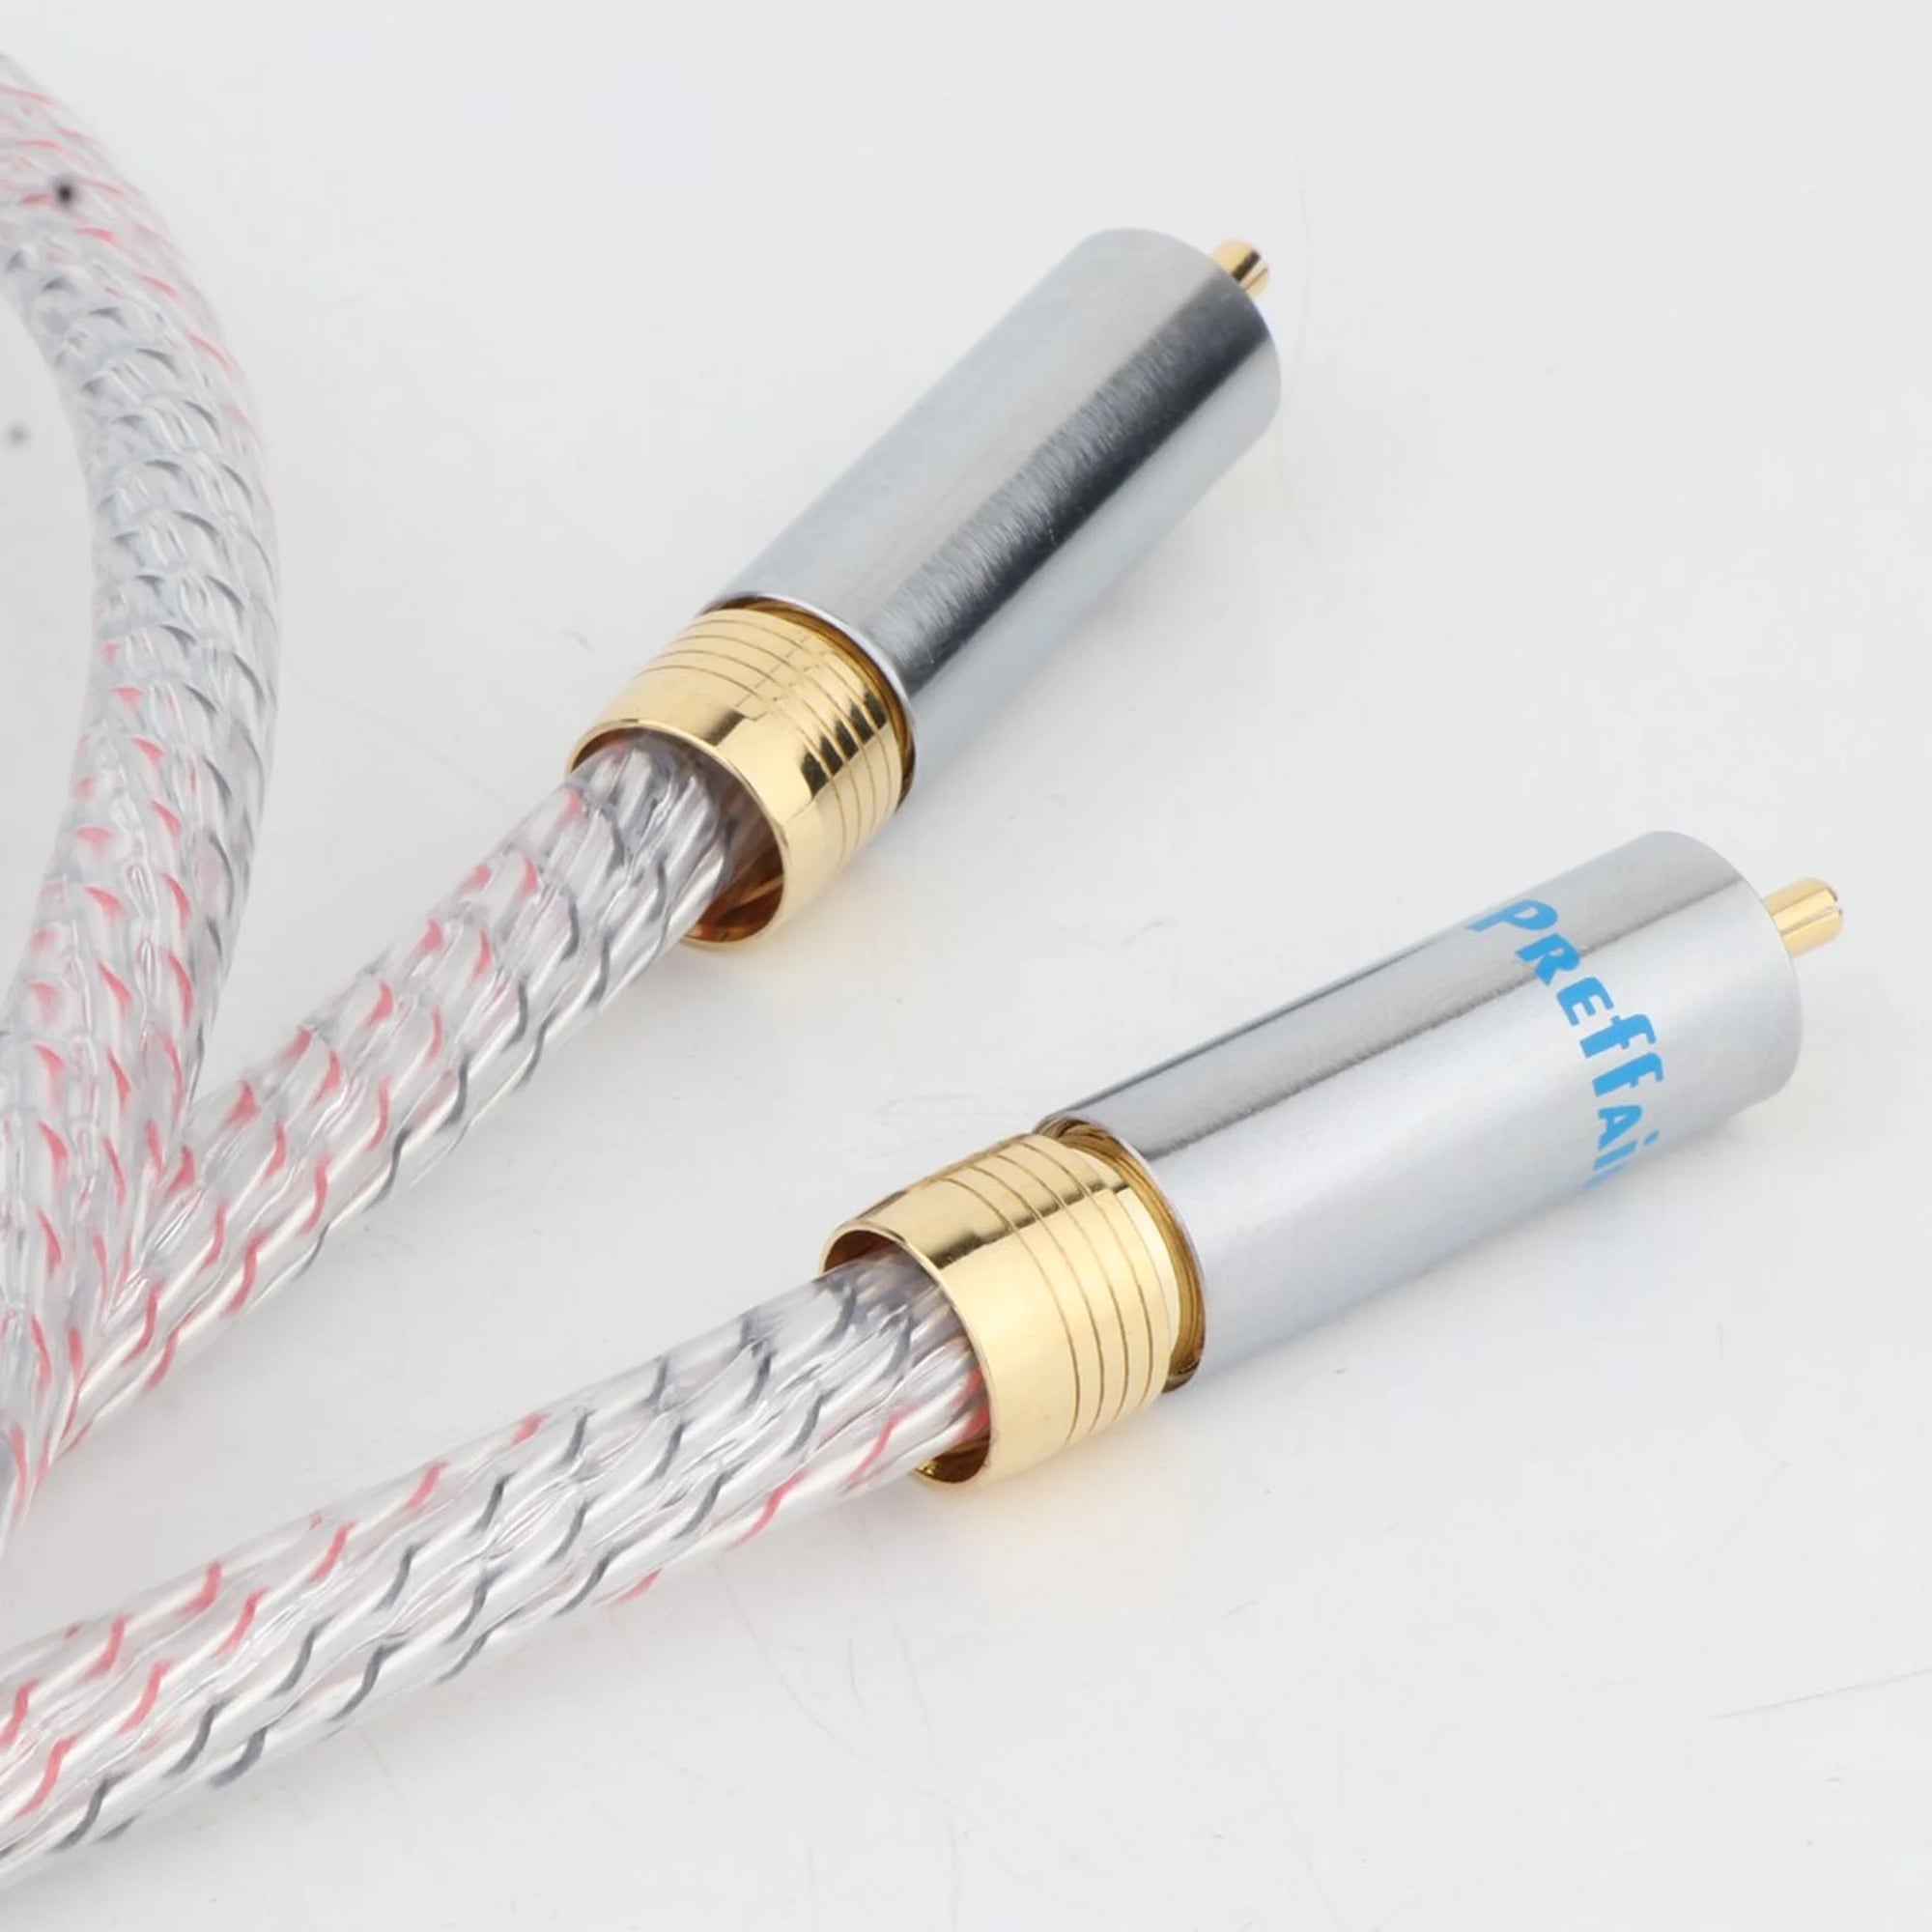 Nordost Valhalla 7N silver plated audio RCA Cable